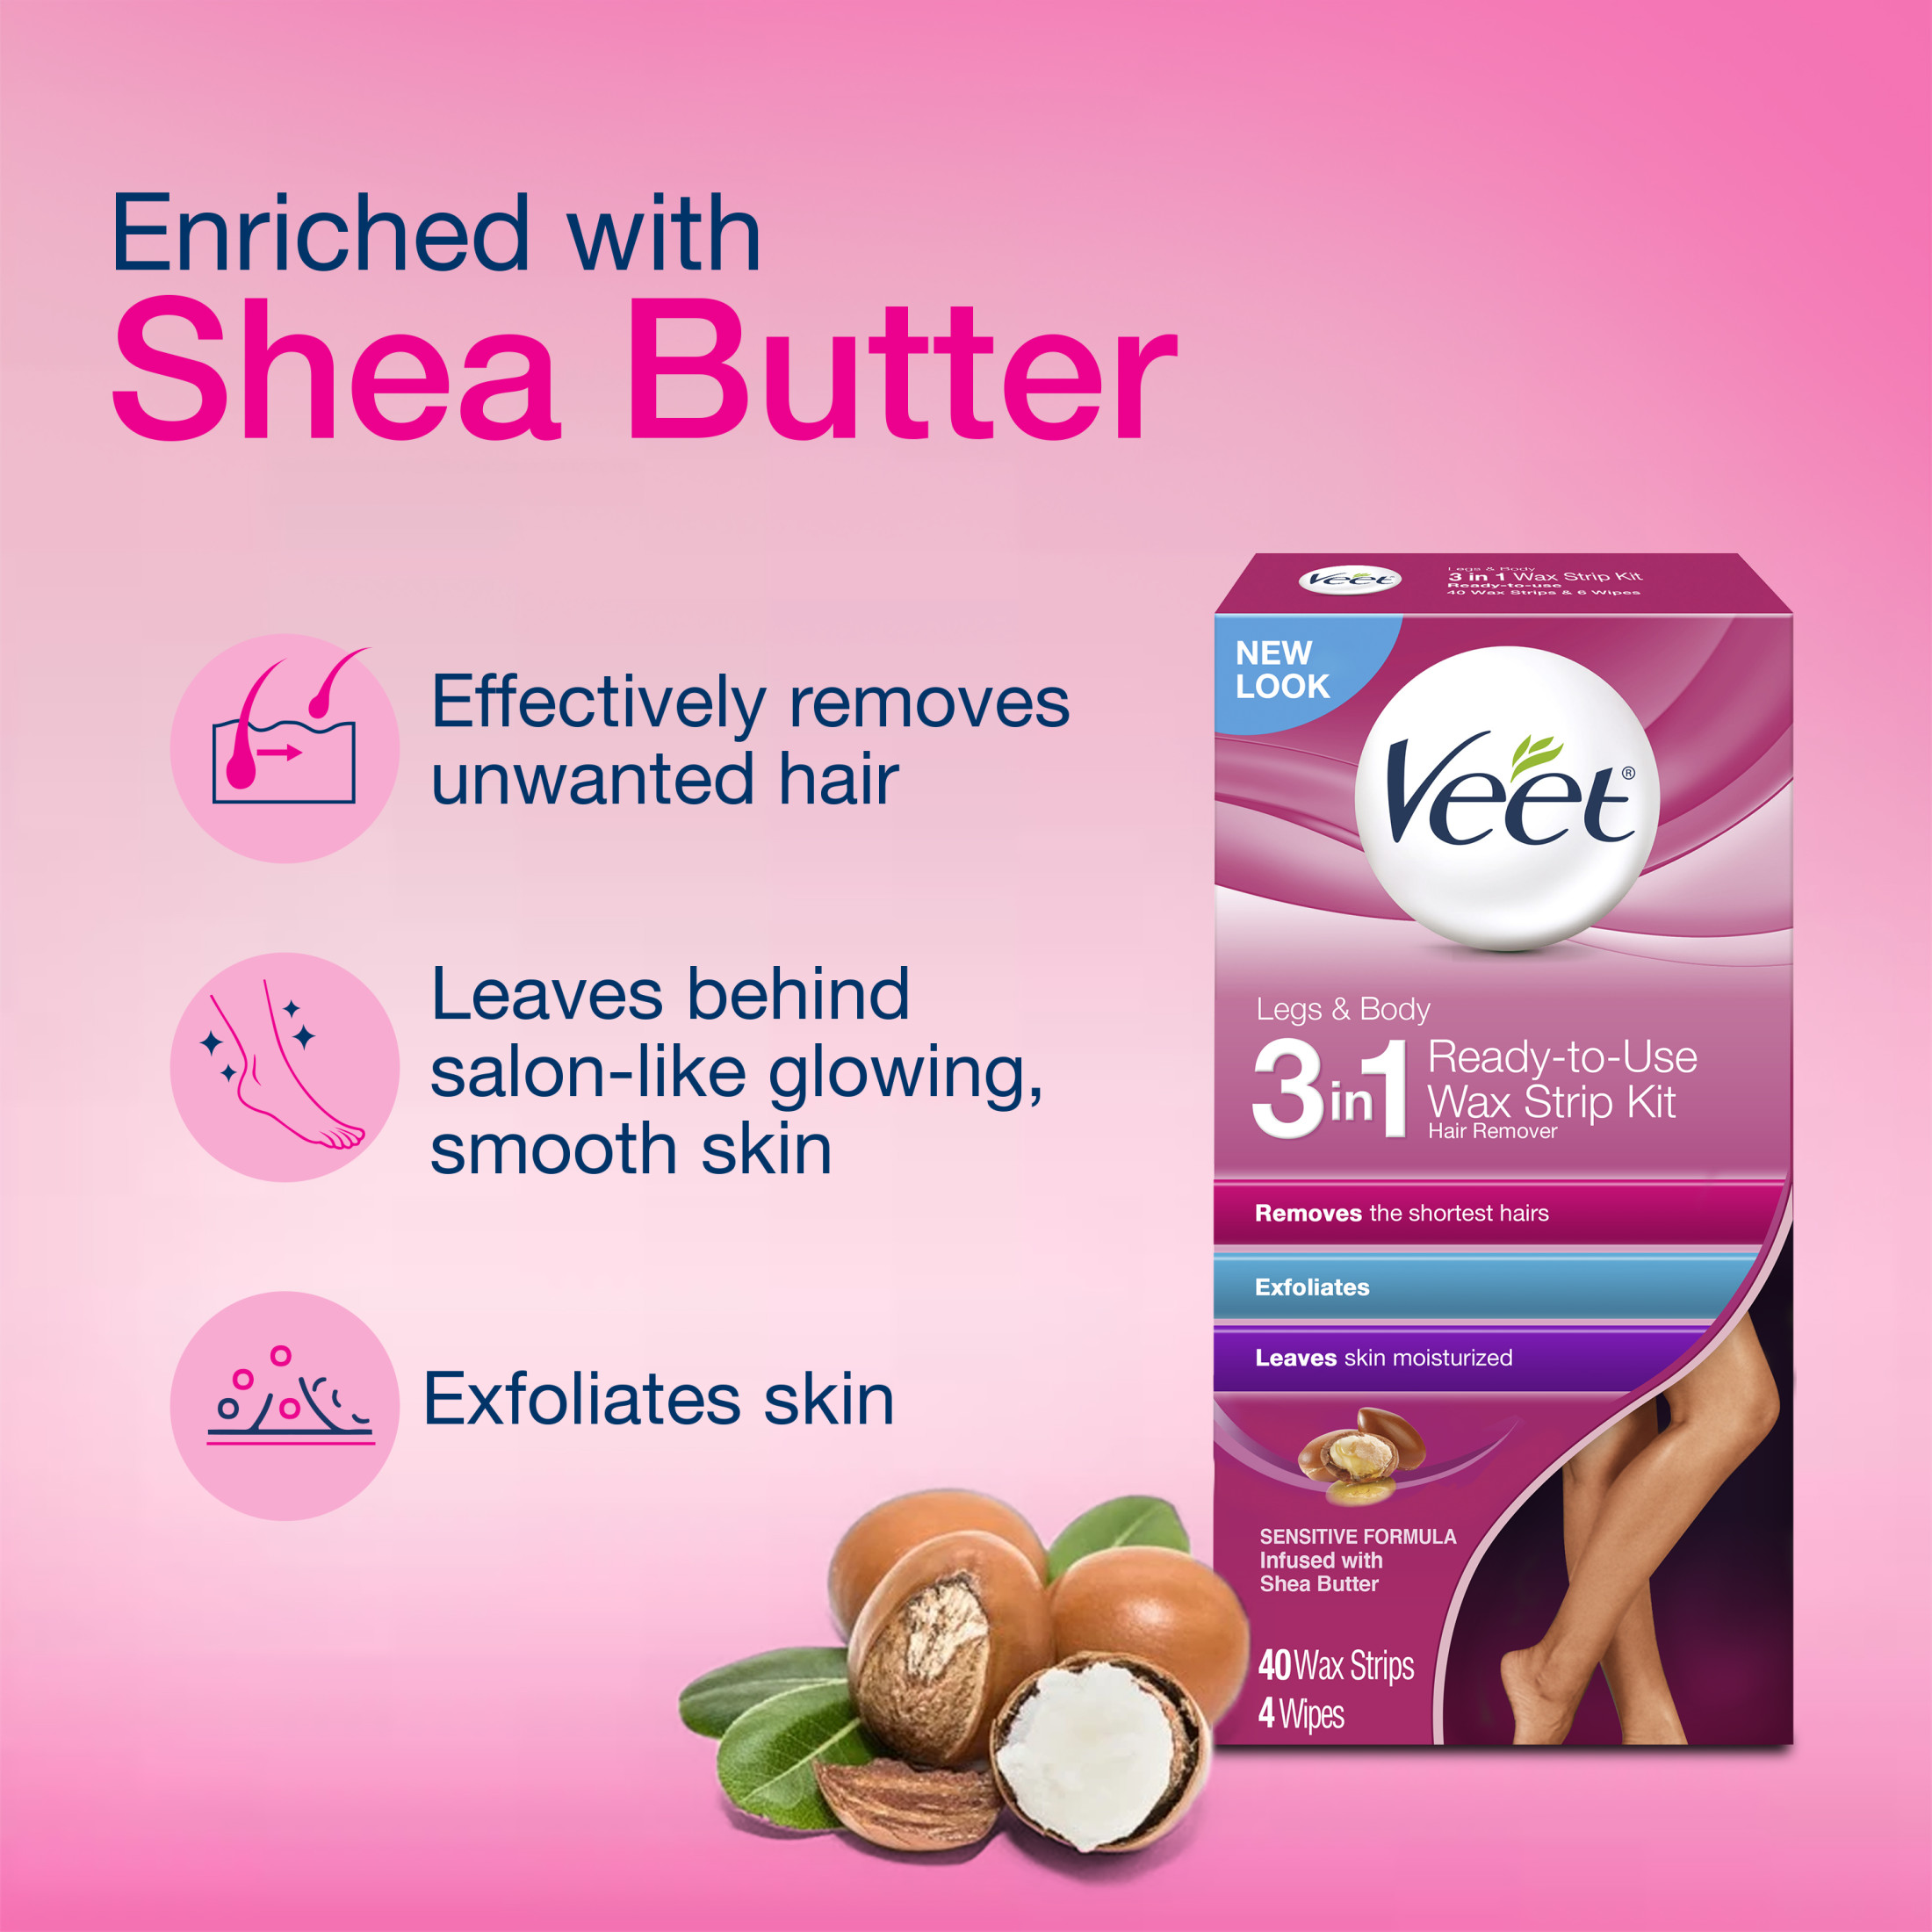 VEET Easy- Gelwax Technology, Sensitive Formula Ready-to-Use Hair Remover Wax Strip Kit with Shea Butter, 40 wax strips with 4 wipes - image 3 of 10